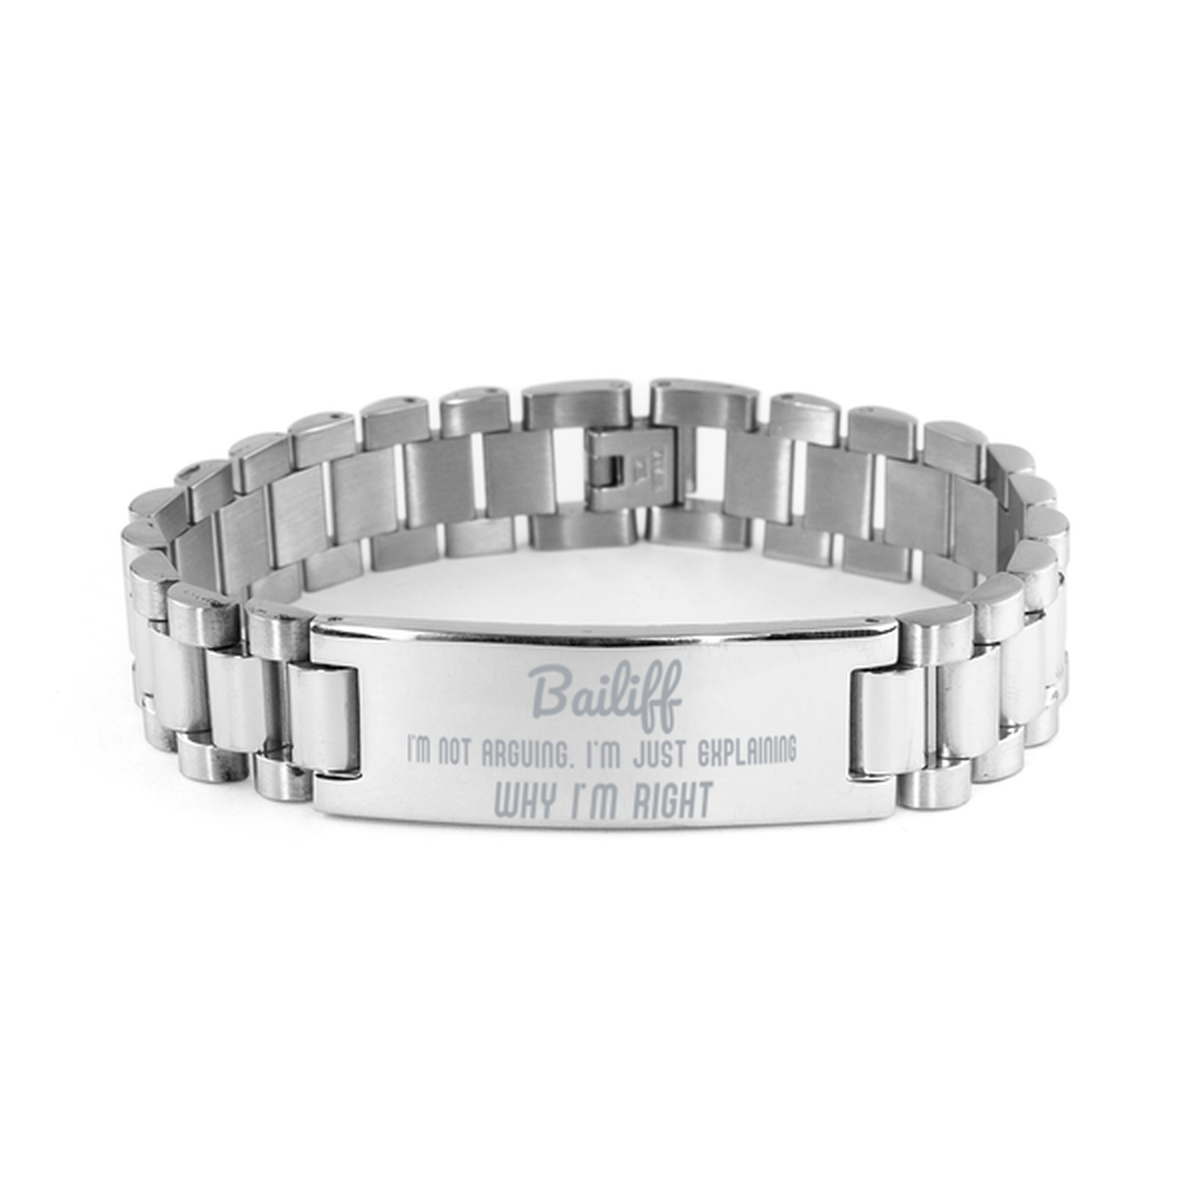 Bailiff I'm not Arguing. I'm Just Explaining Why I'm RIGHT Ladder Stainless Steel Bracelet, Graduation Birthday Christmas Bailiff Gifts For Bailiff Funny Saying Quote Present for Men Women Coworker